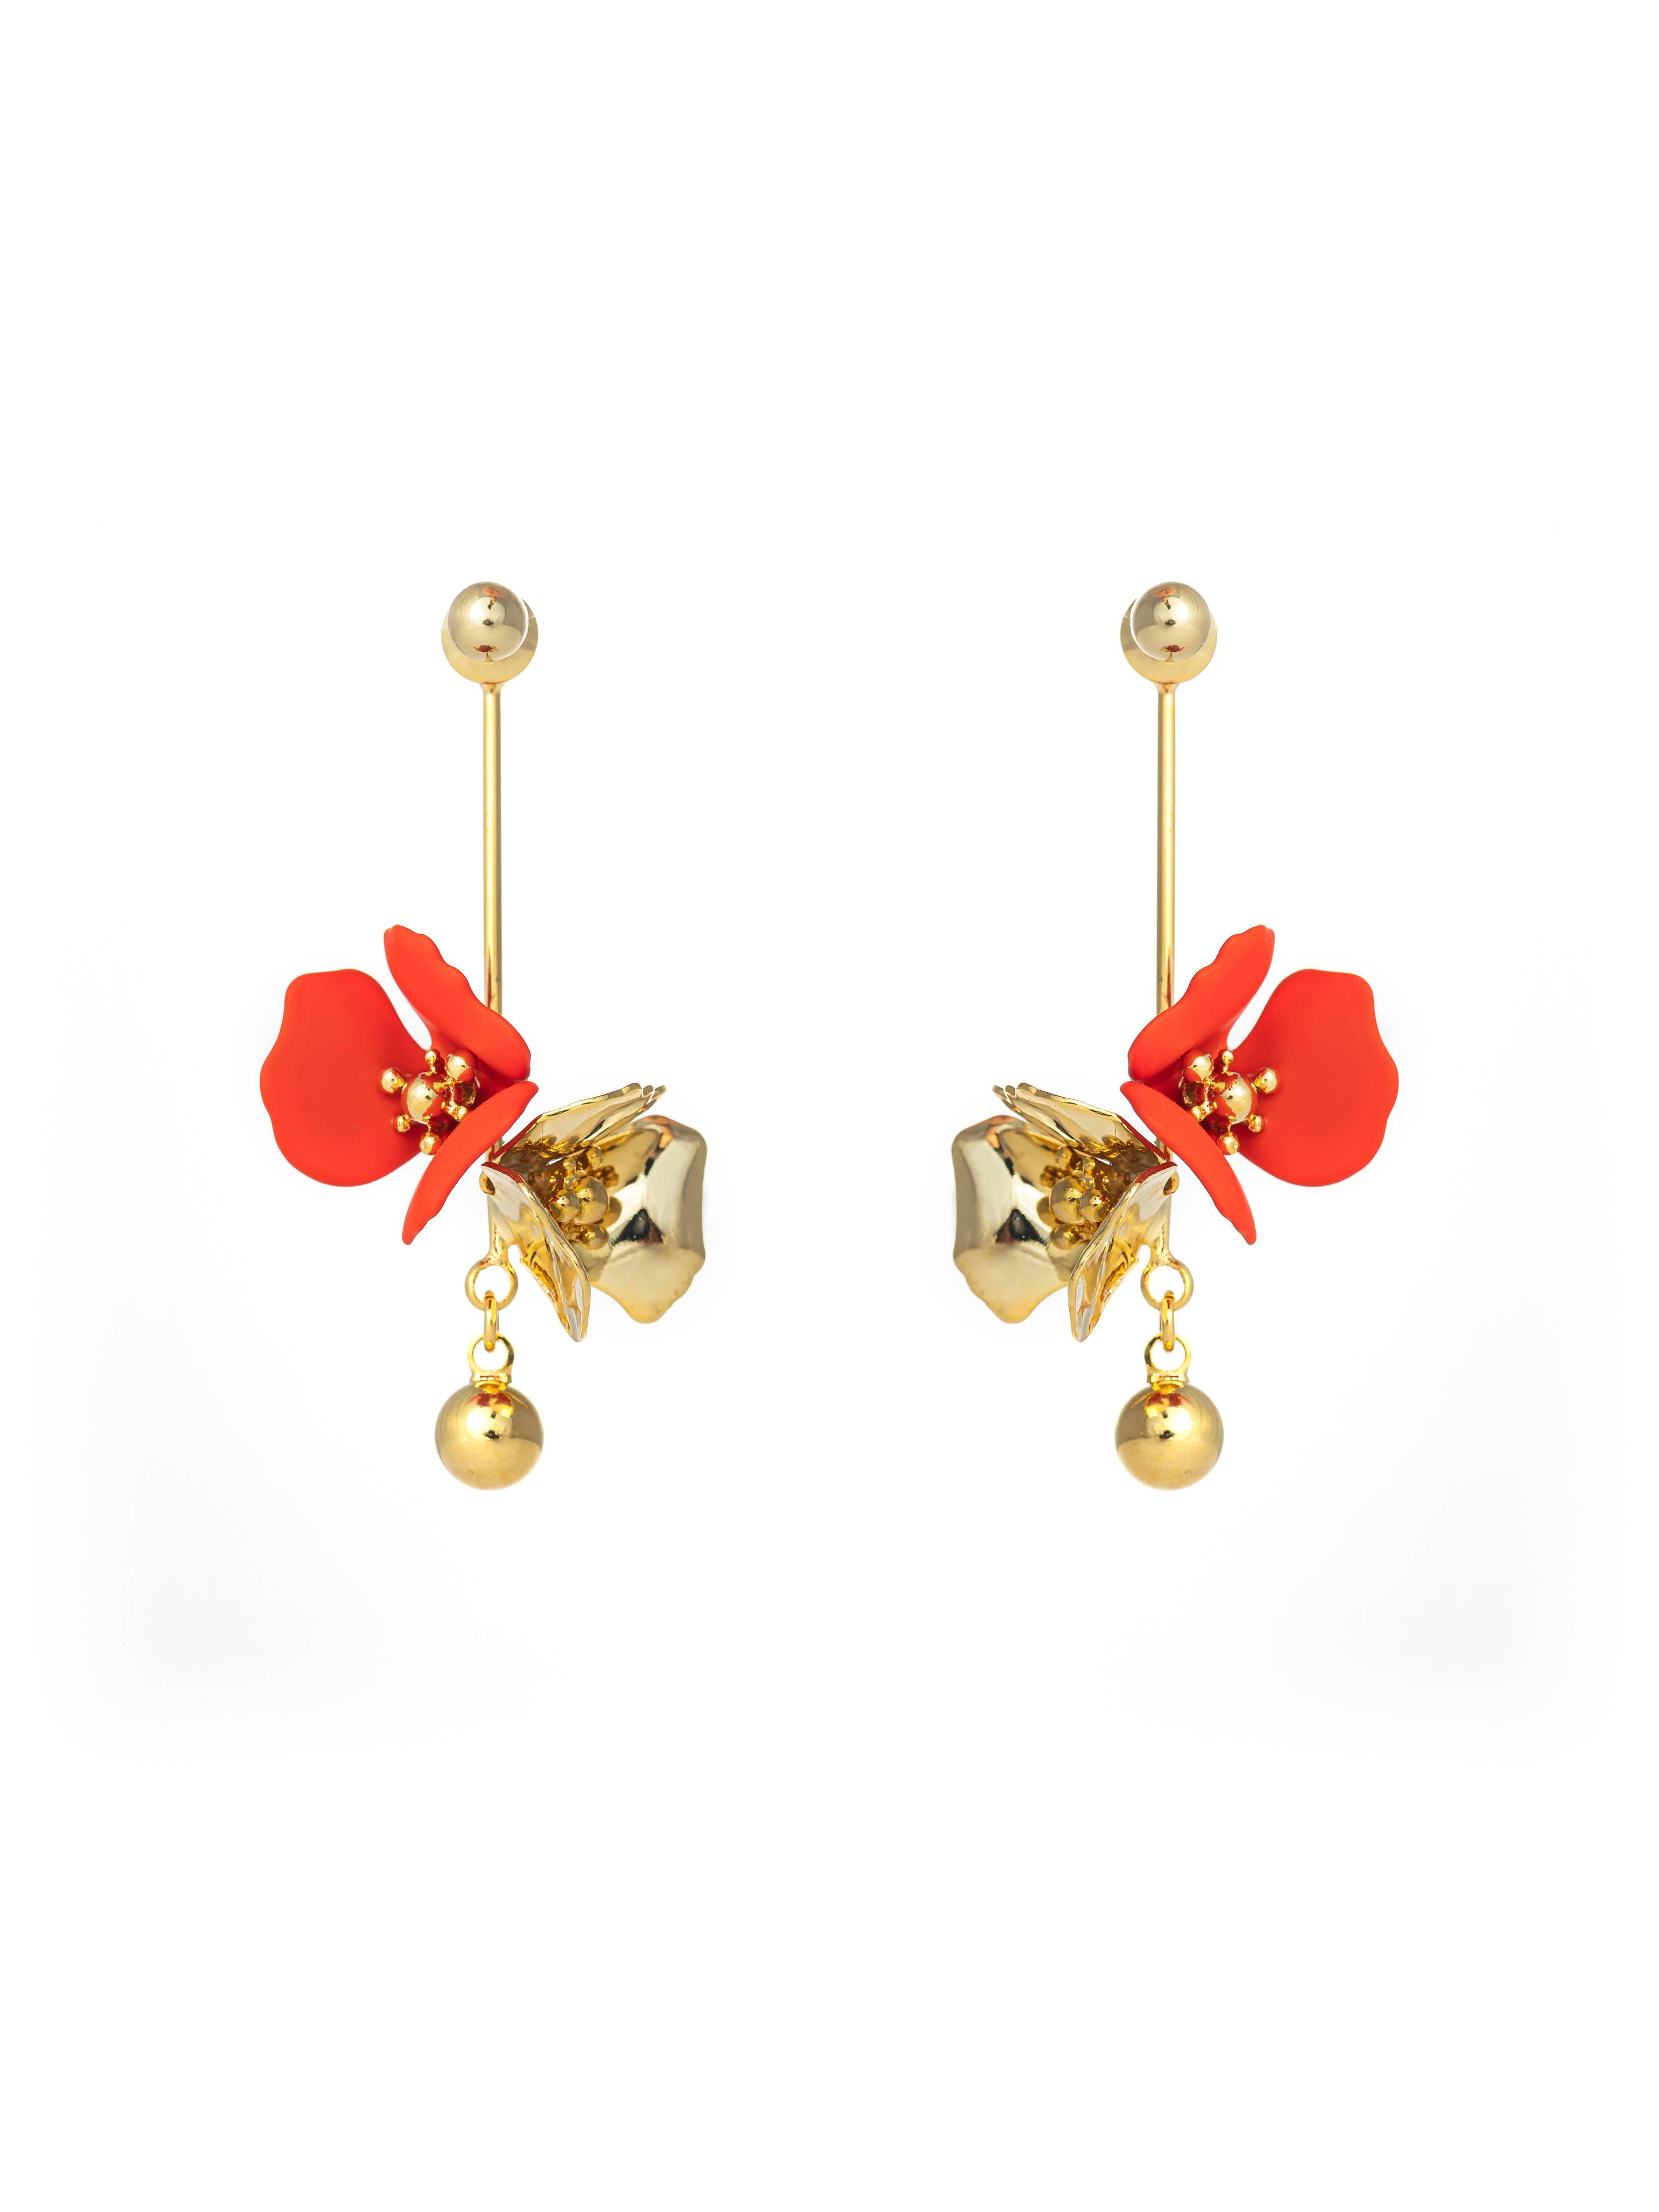 Gold Plated Dangling Flora Earrings - Earrings - Forest Jewelry - Naiise